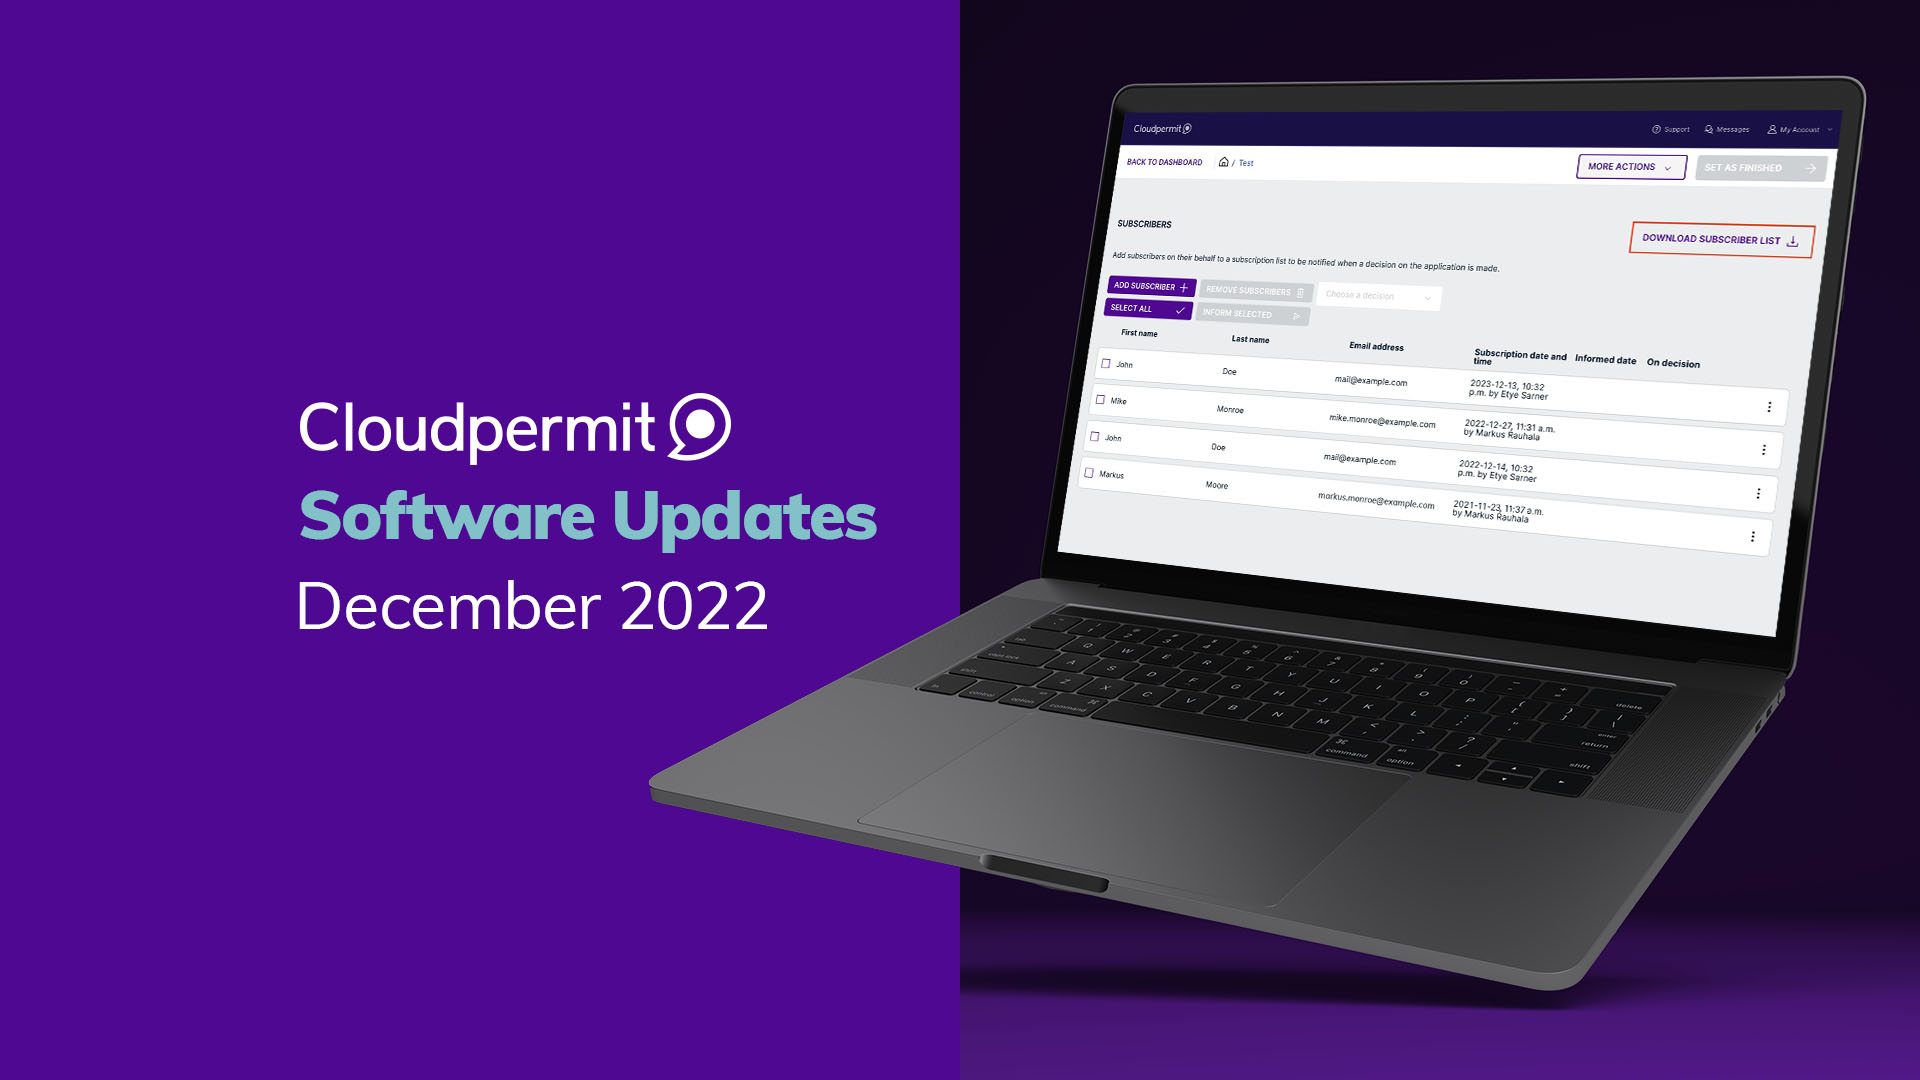 Software Updates: New Sorting Options, Tracking Circulation Request Due Dates, Download Subscriber Lists for Planning Approvals, and More